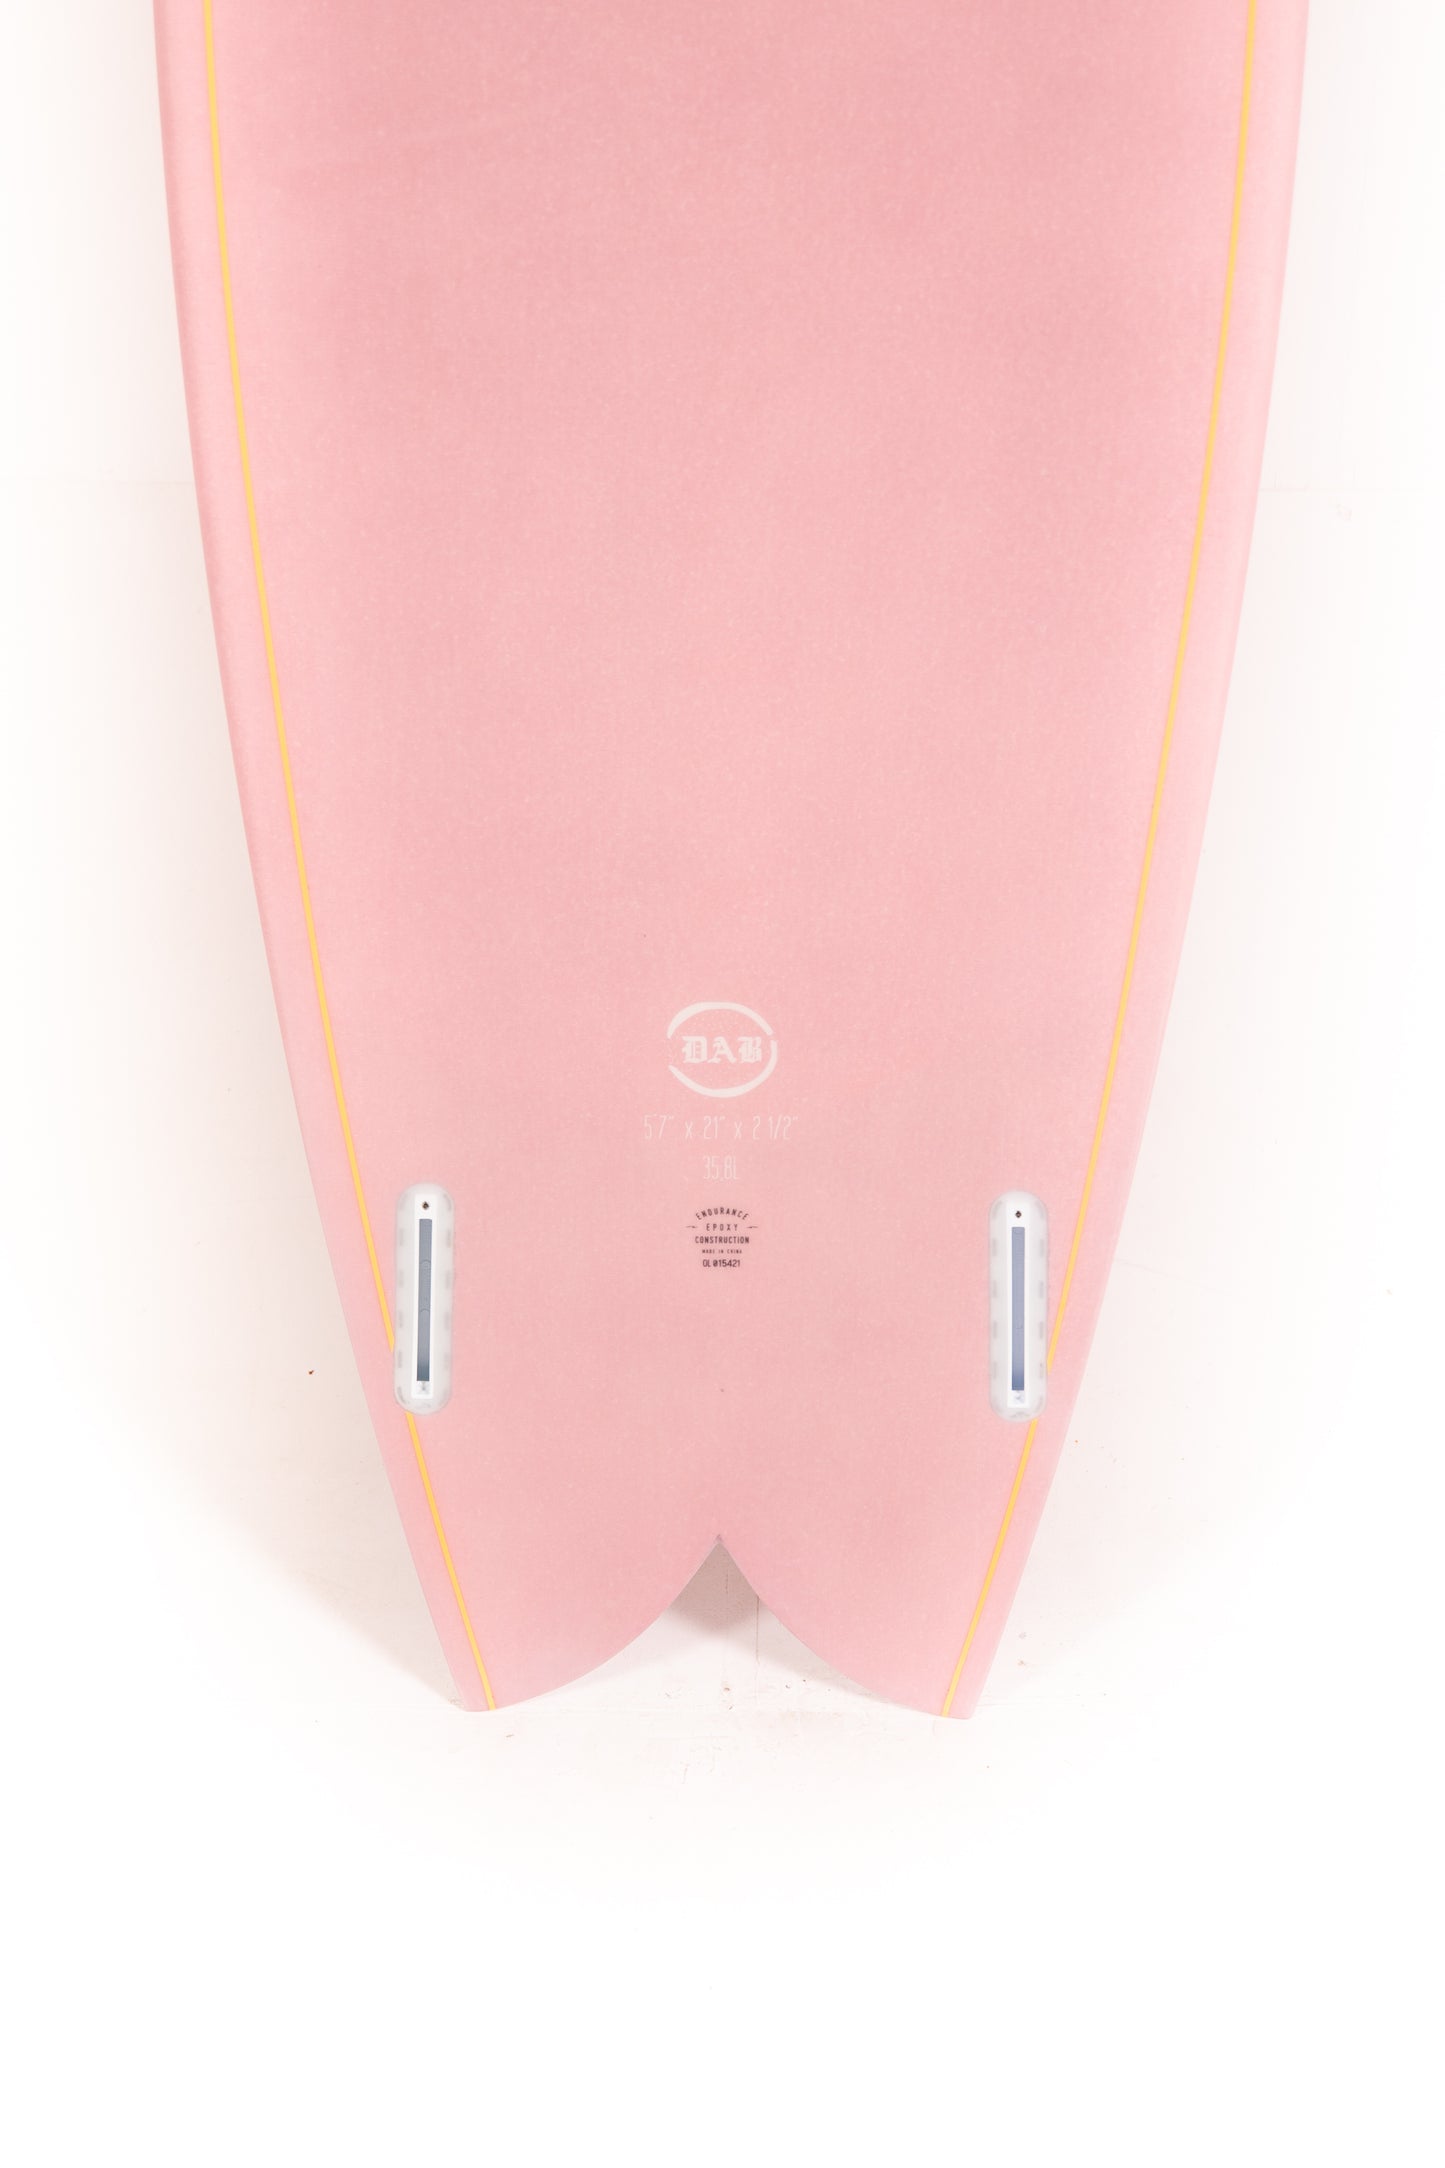 
                  
                    Pukas-Surf-Shop-Indio-Surfboards-Dab-pink-5_7
                  
                